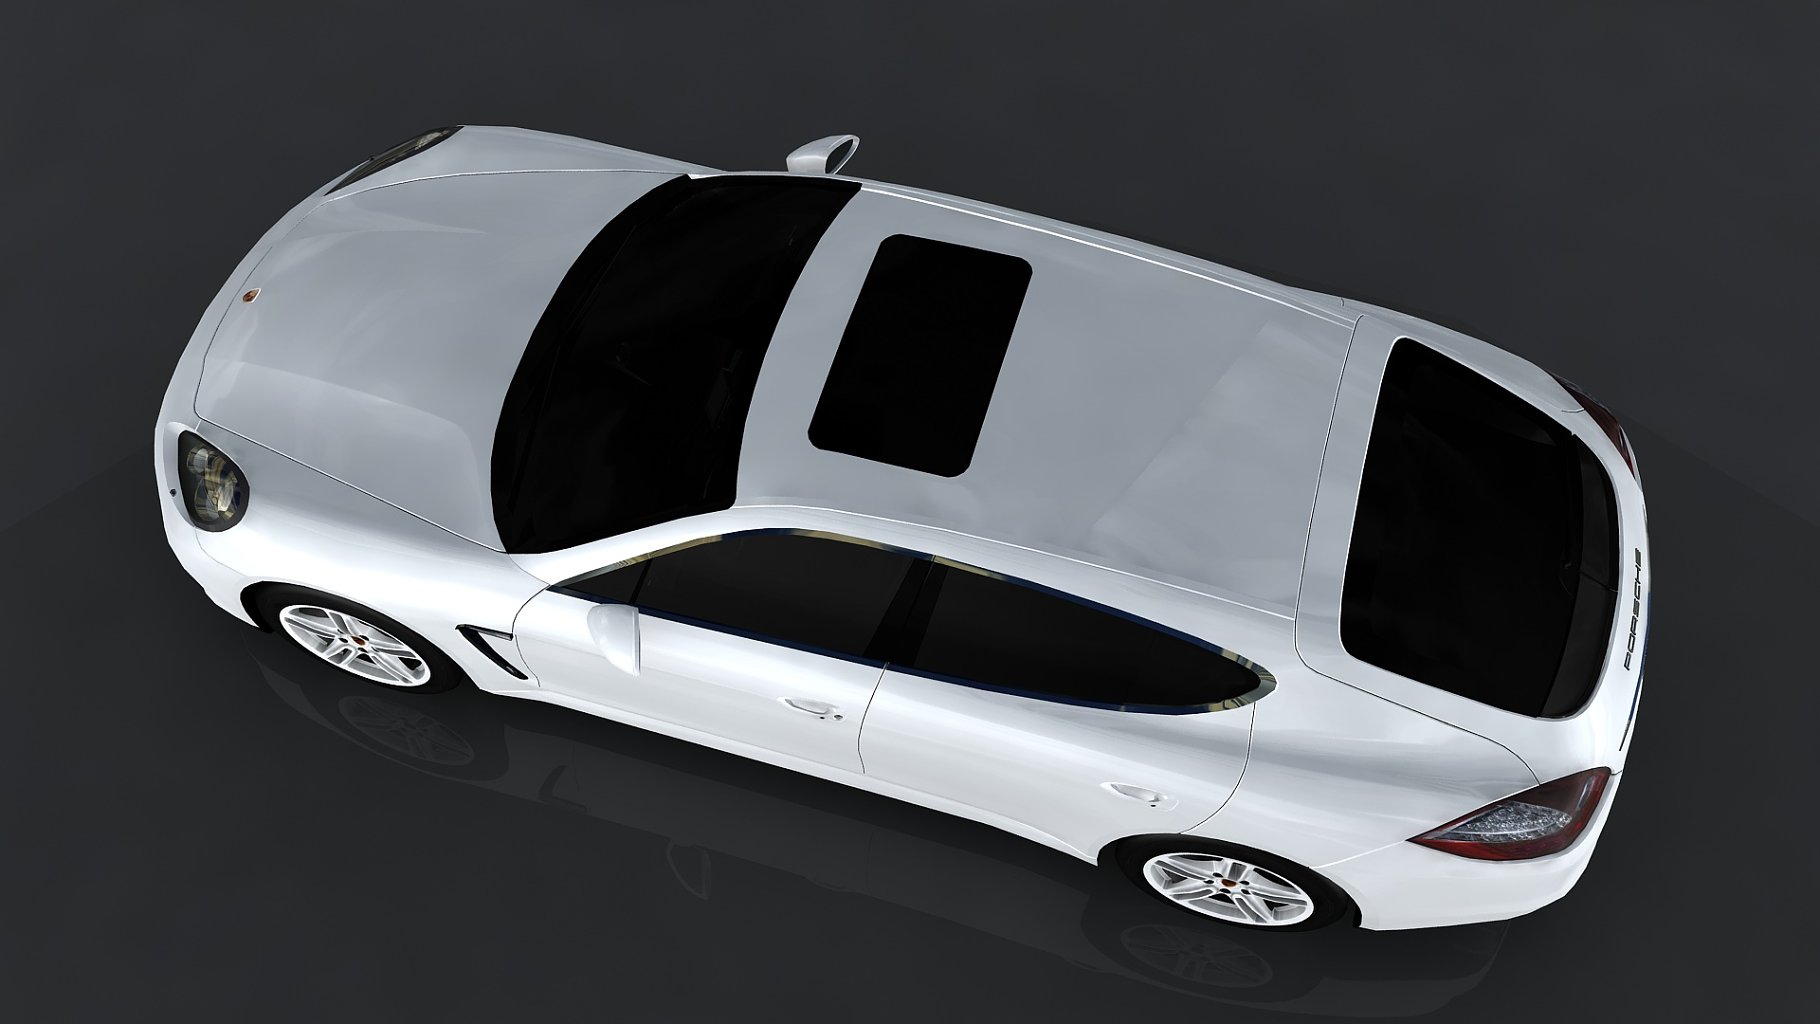 2010 porsche panamera turbo mockup on a dark gray background from above.